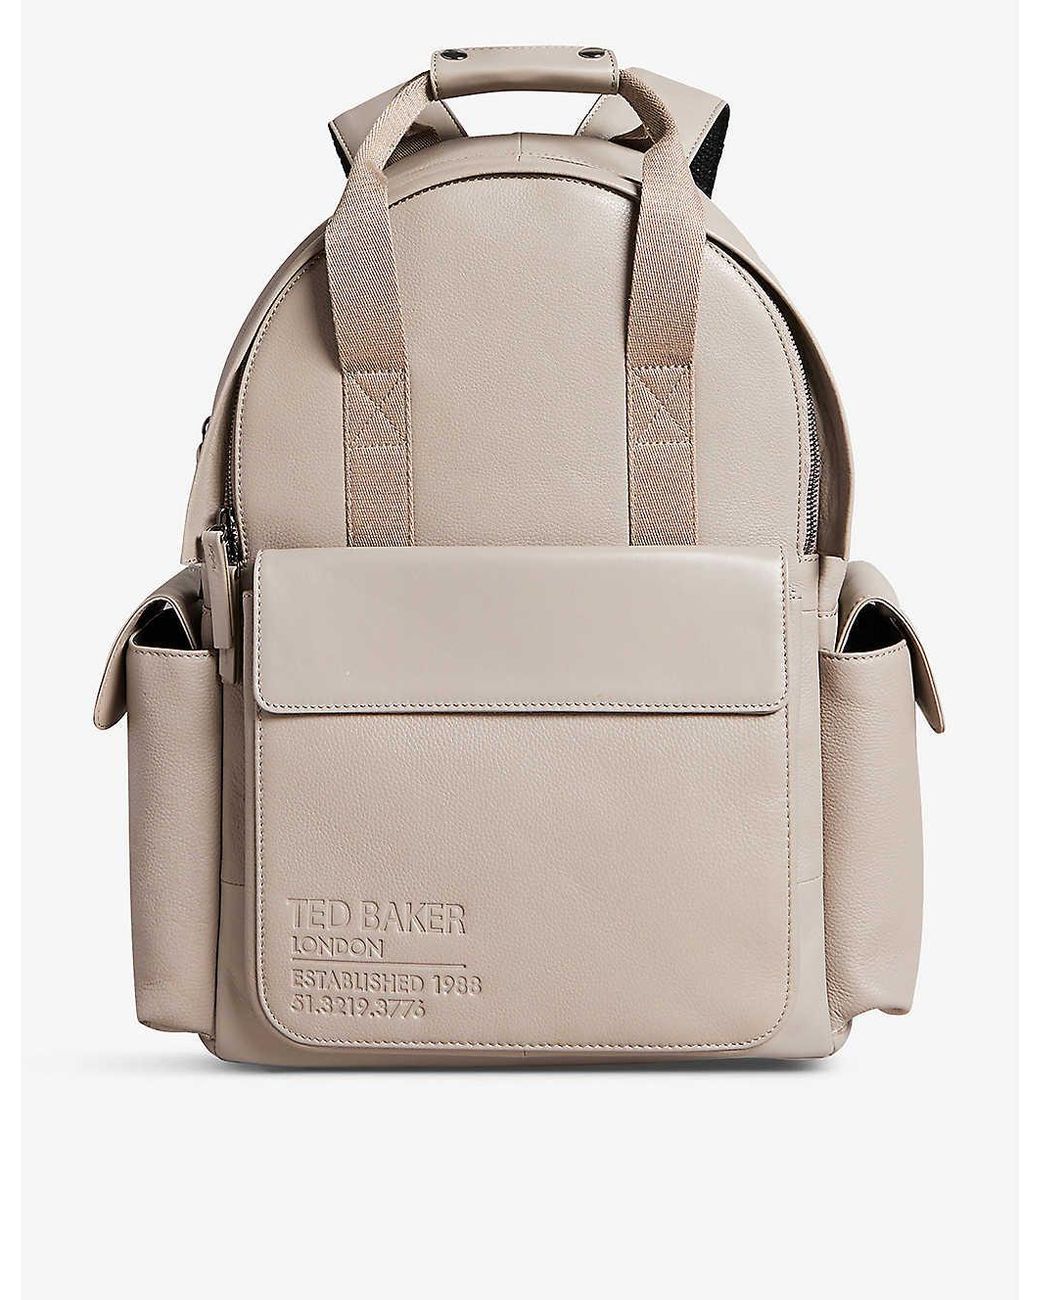 Ted Baker Kailen Leather Backpack in Natural | Lyst